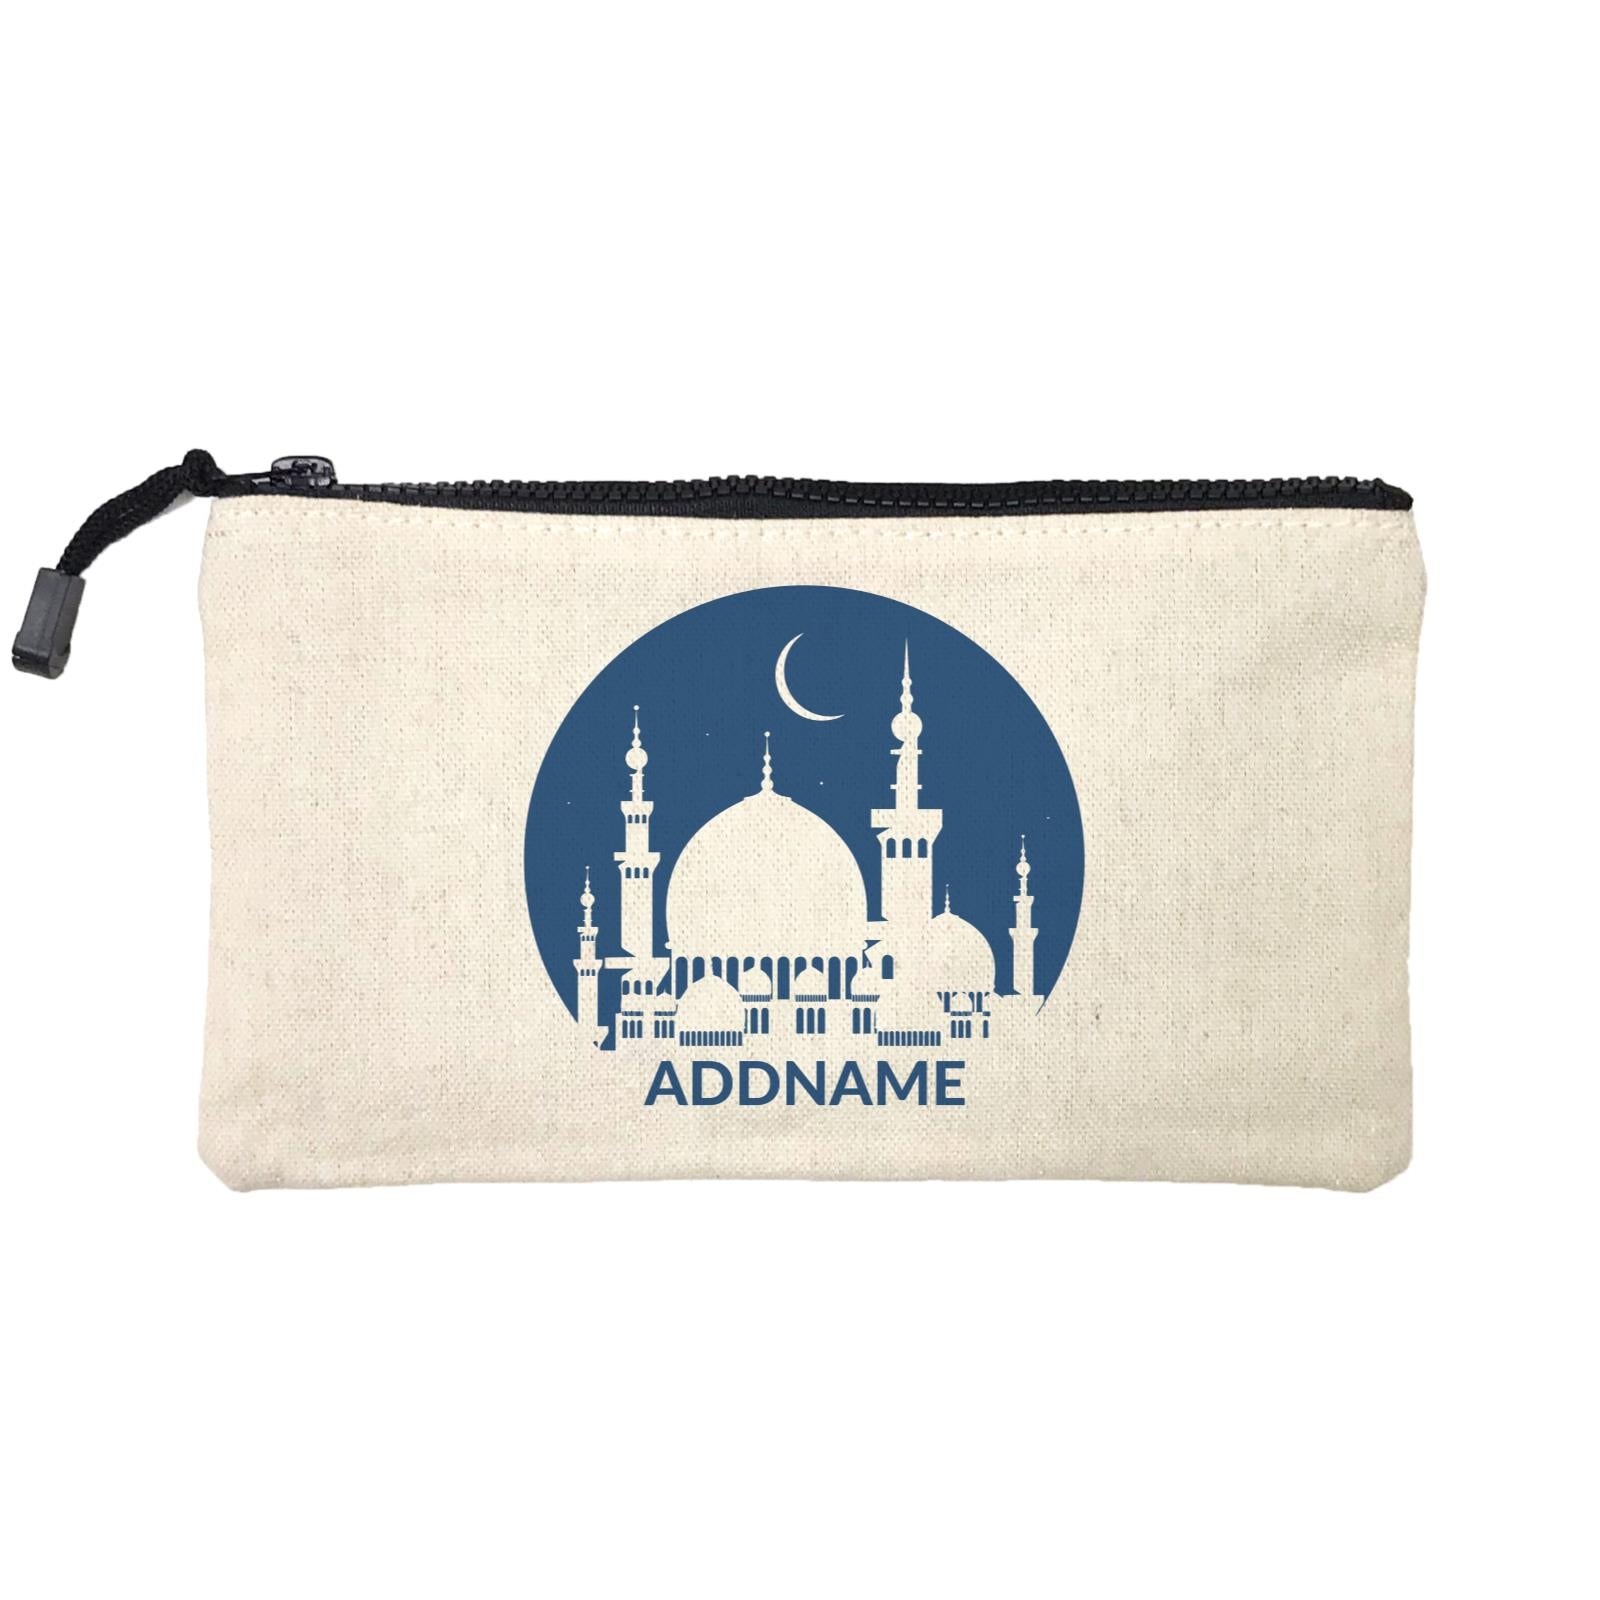 Mosque Moon Addname Mini Accessories Stationery Pouch